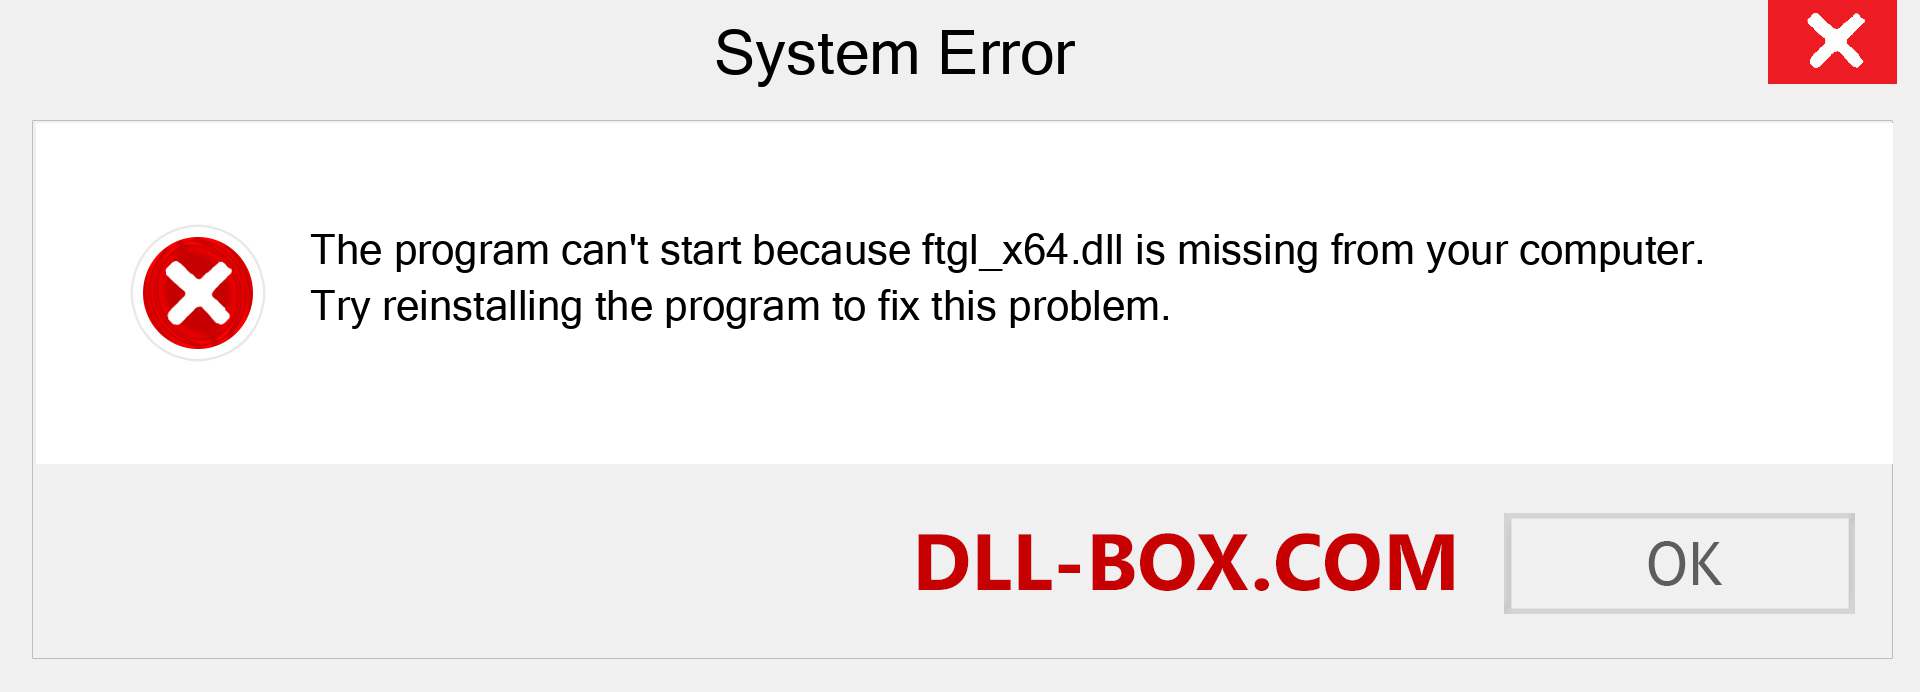  ftgl_x64.dll file is missing?. Download for Windows 7, 8, 10 - Fix  ftgl_x64 dll Missing Error on Windows, photos, images